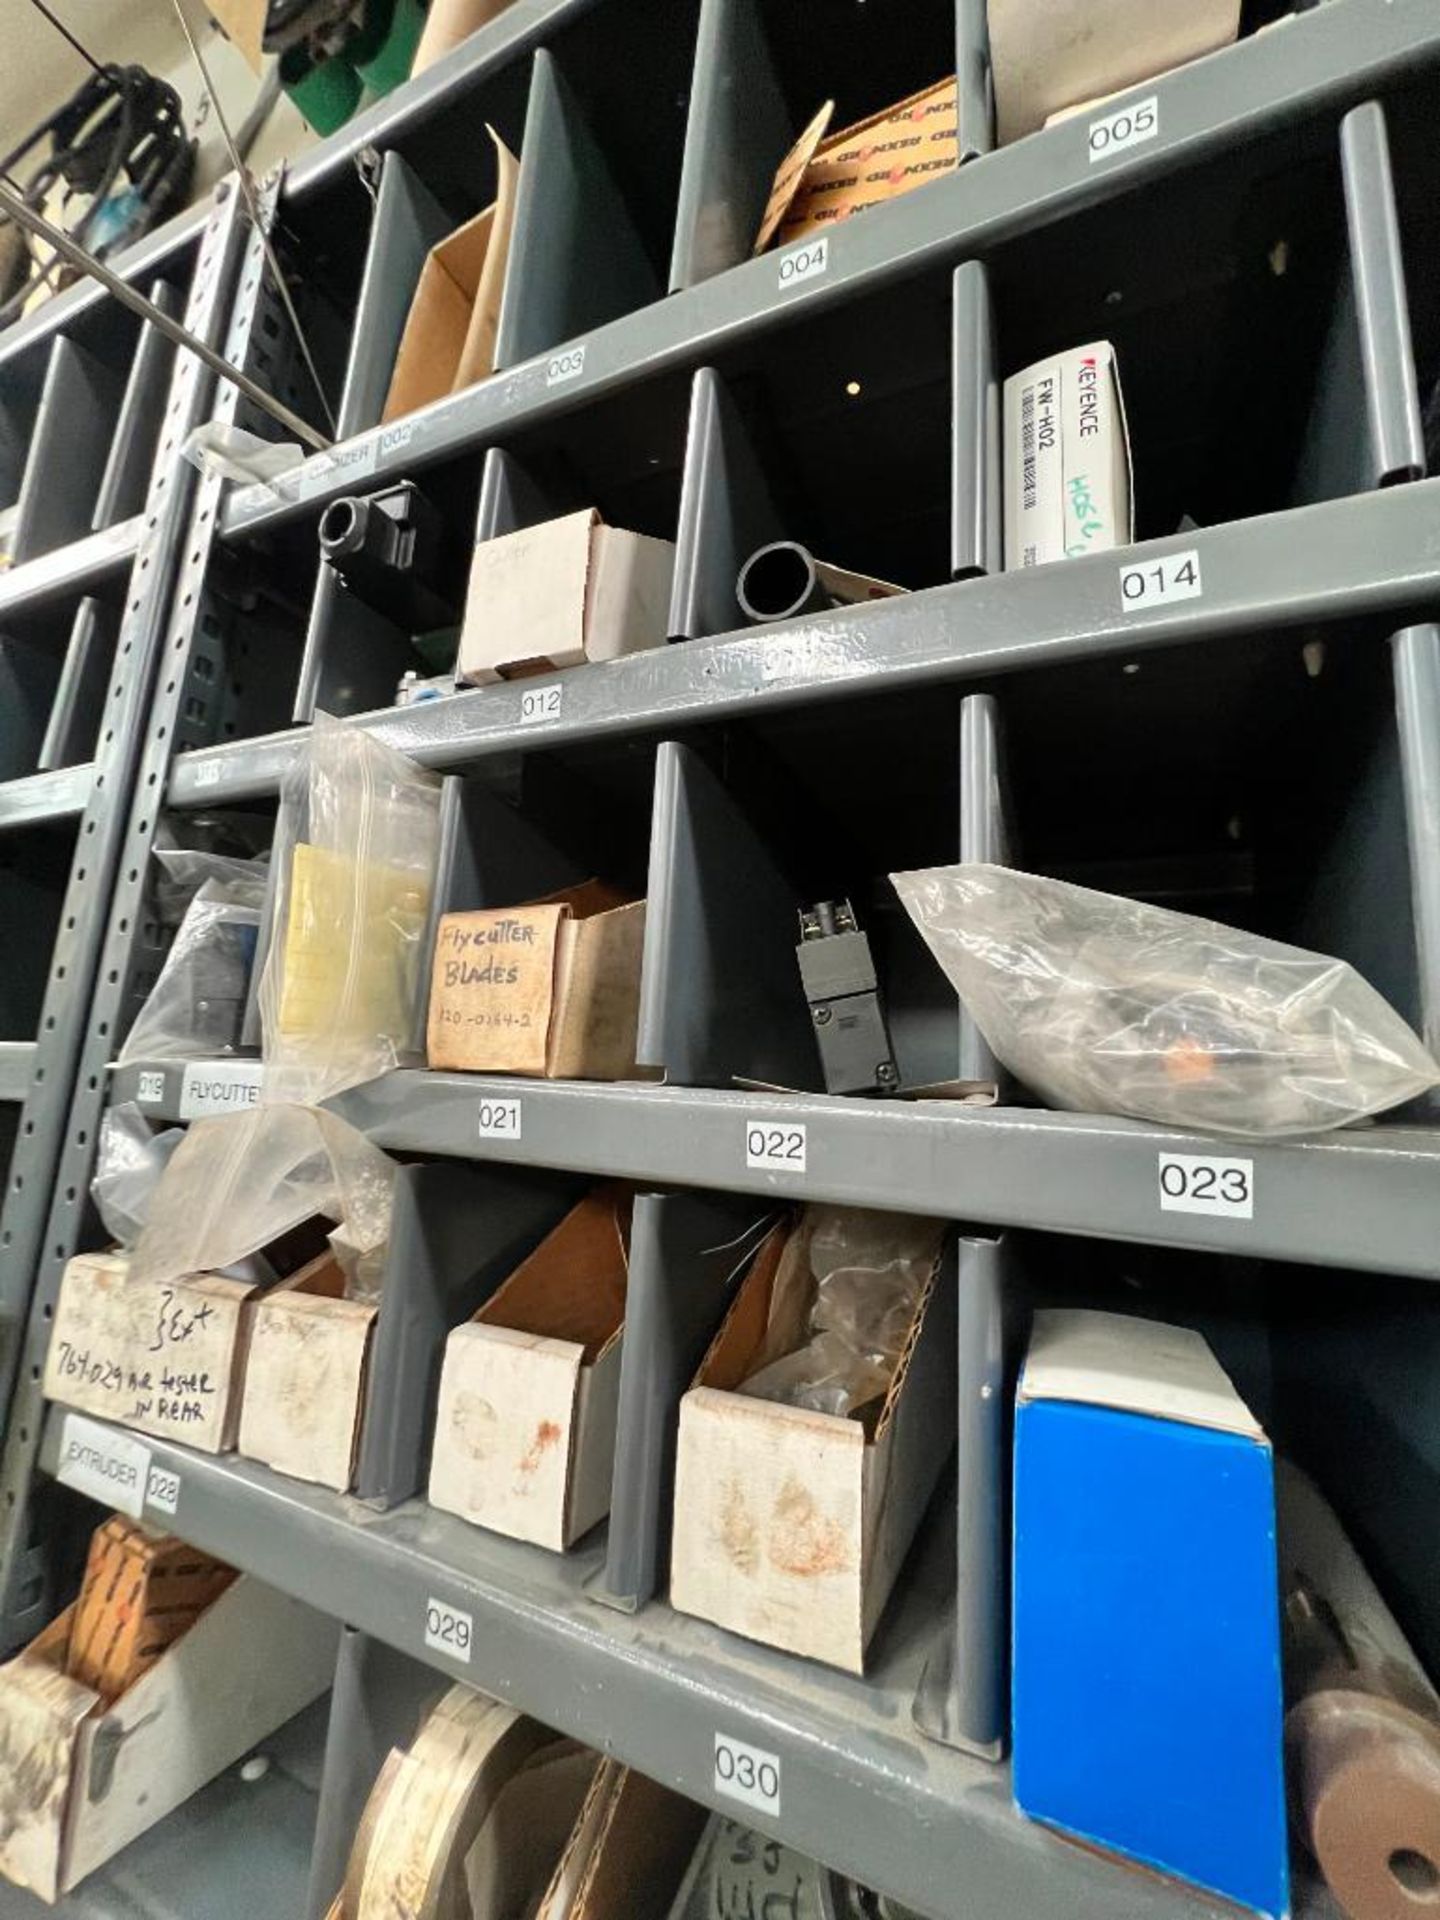 (28) Shelves of Assorted Parts, VERY LARGE LOT Consisting of MRO, Drives, Valves, PLC, Nuts, Bolts, - Image 33 of 67